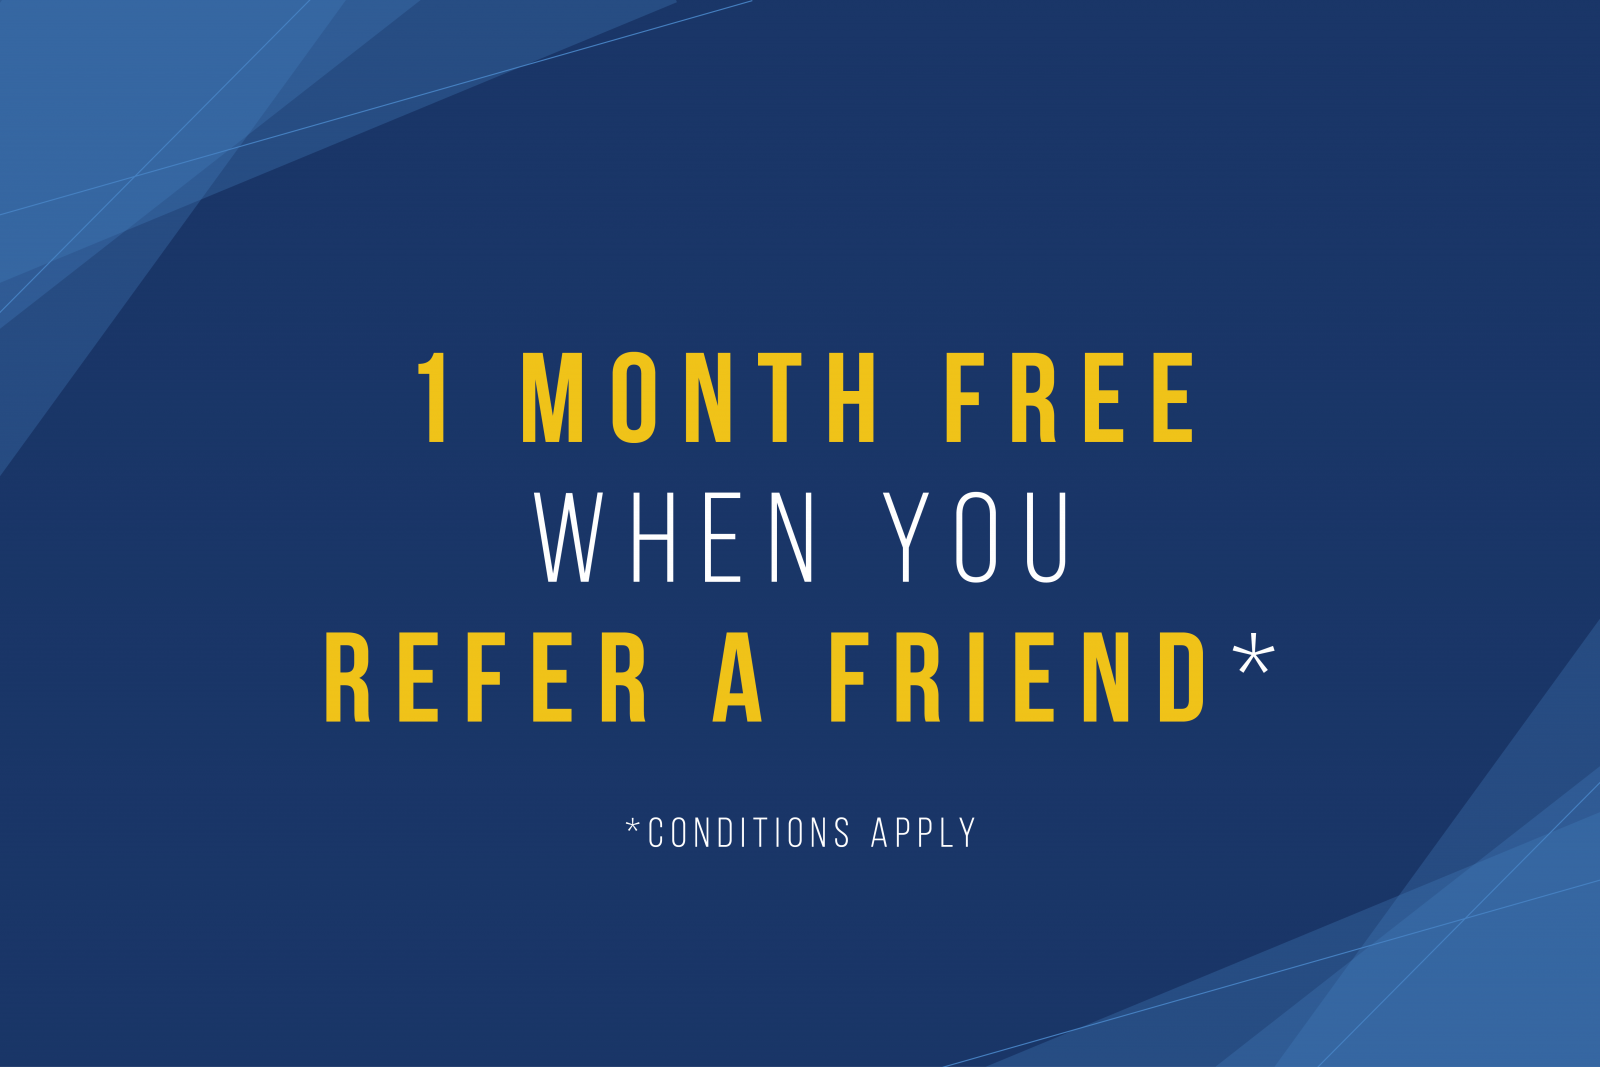 1 month free when you refer a friend. Conditions apply.